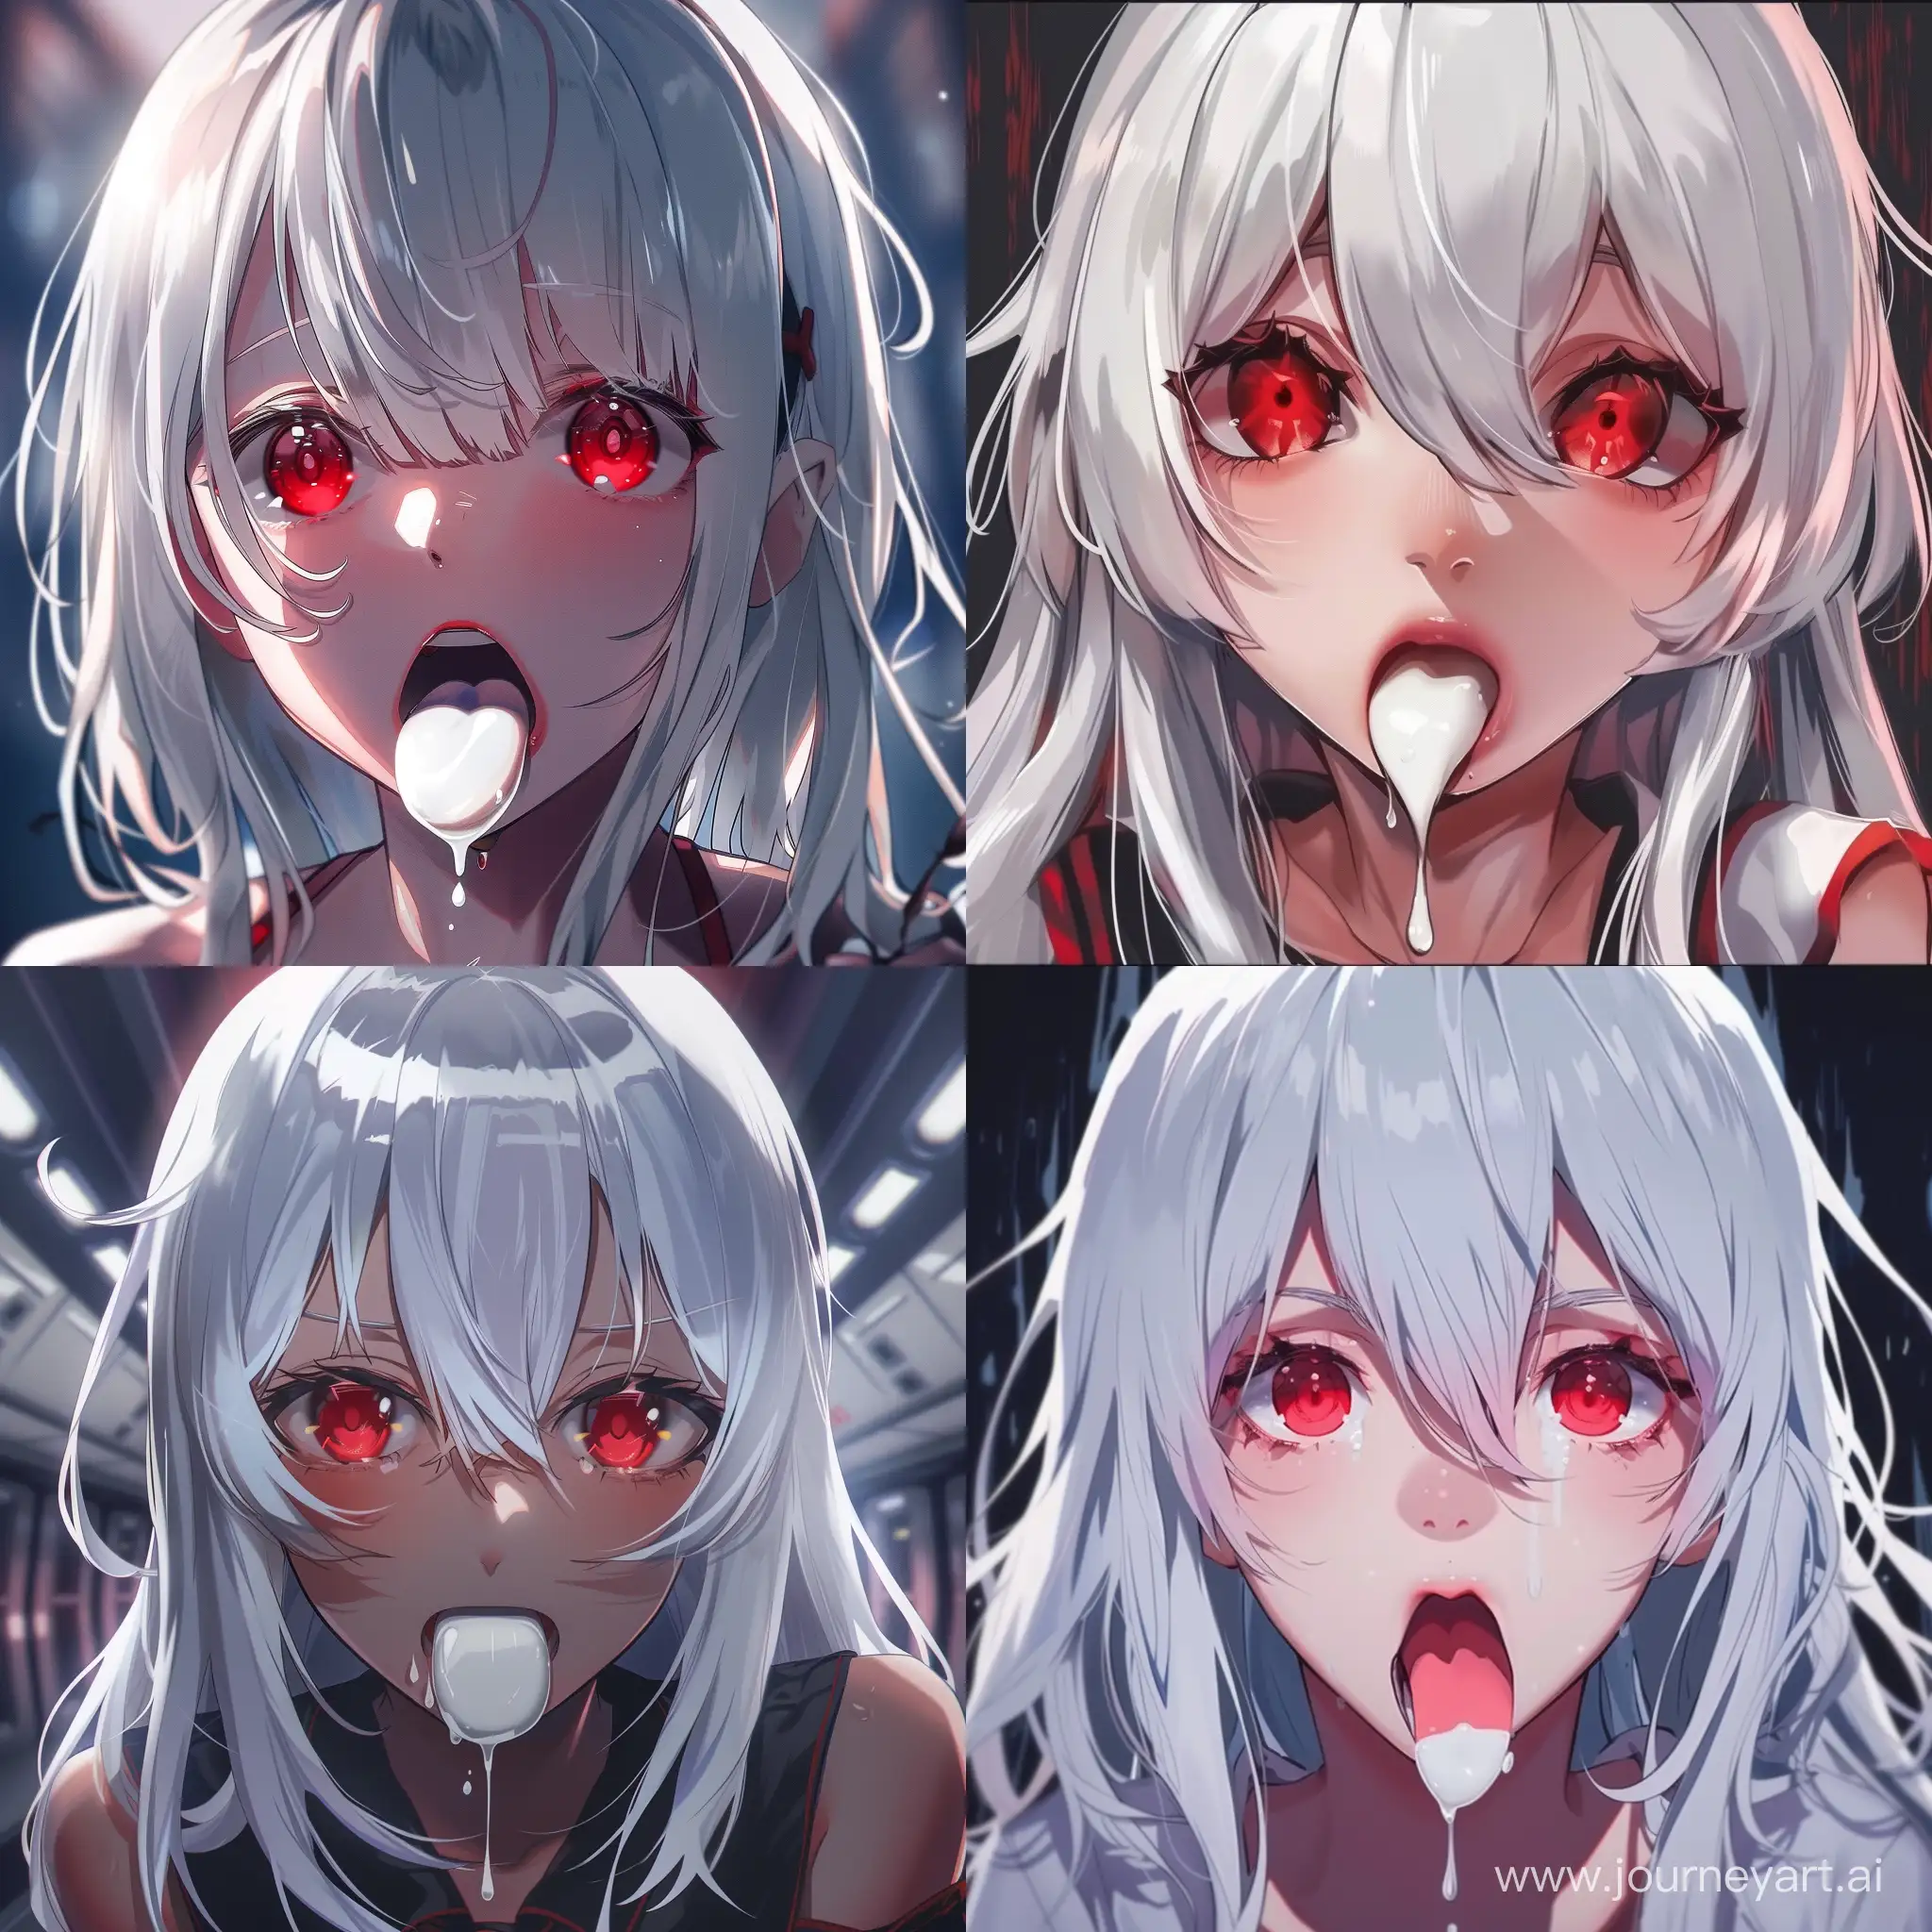 Playful-Anime-Girl-with-White-Hair-and-Red-Eyes-Sticking-Out-Tongue